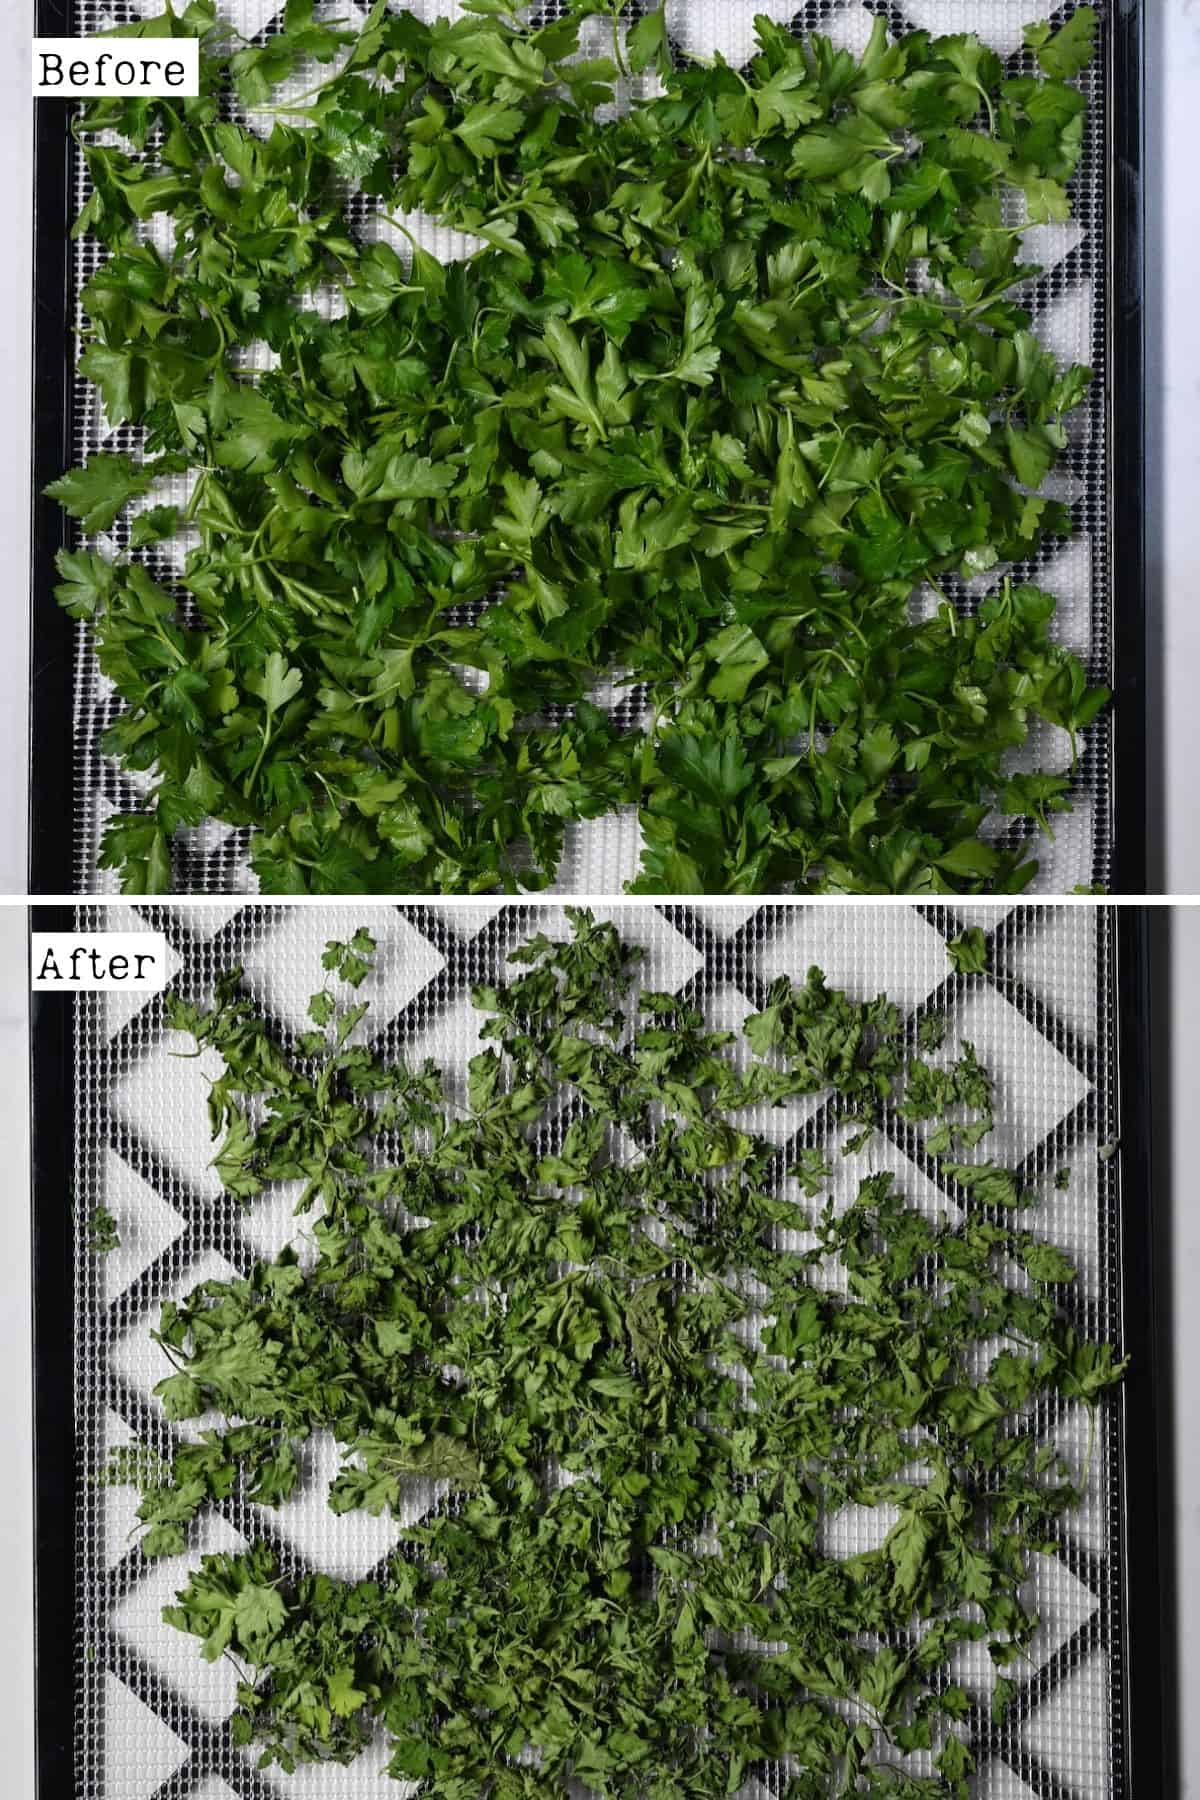 Before and after dehydrating parsley